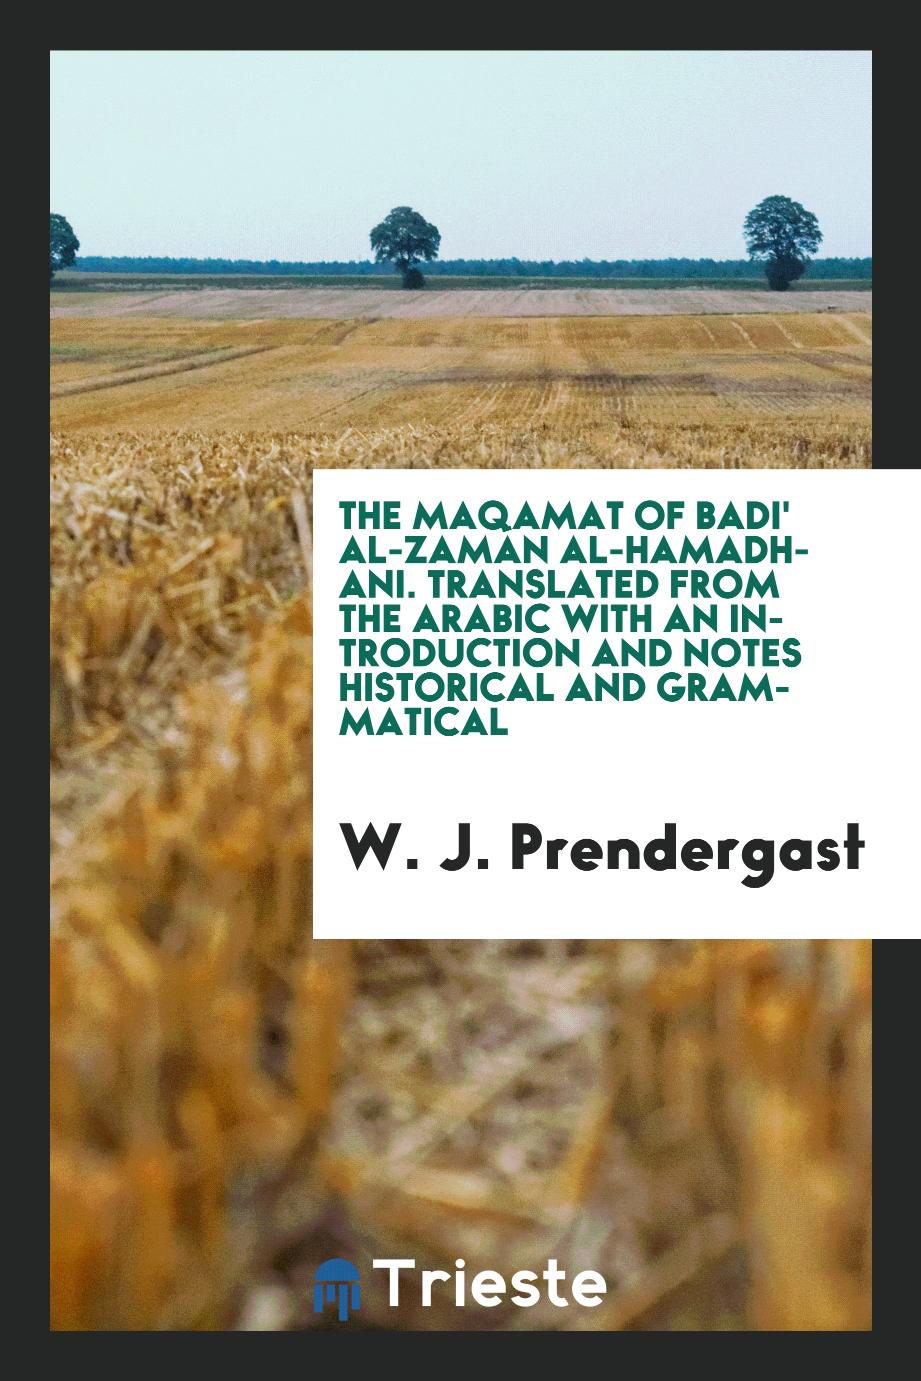 The Maqamat of Badi' al-Zamán al-Hamadhani. Translated from the Arabic with an introduction and notes historical and grammatical